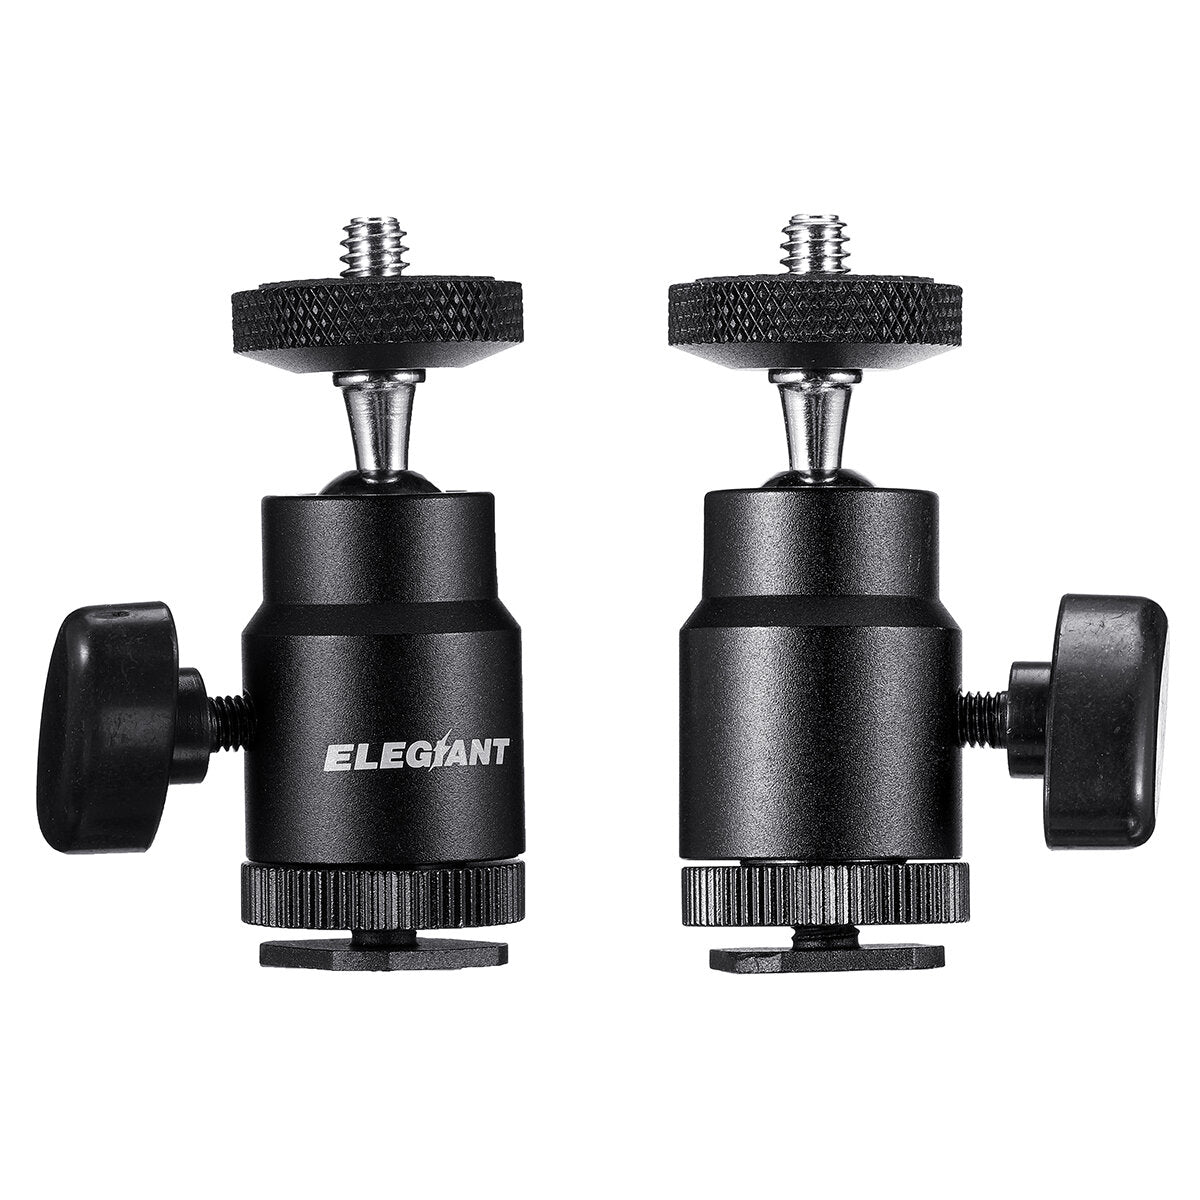 ELEGIANT EGP-A04 1/4 inch Camera Cold Shoe Mount Gimbals for LED Right Light Tripod Stand for Youtube Live Broadcast